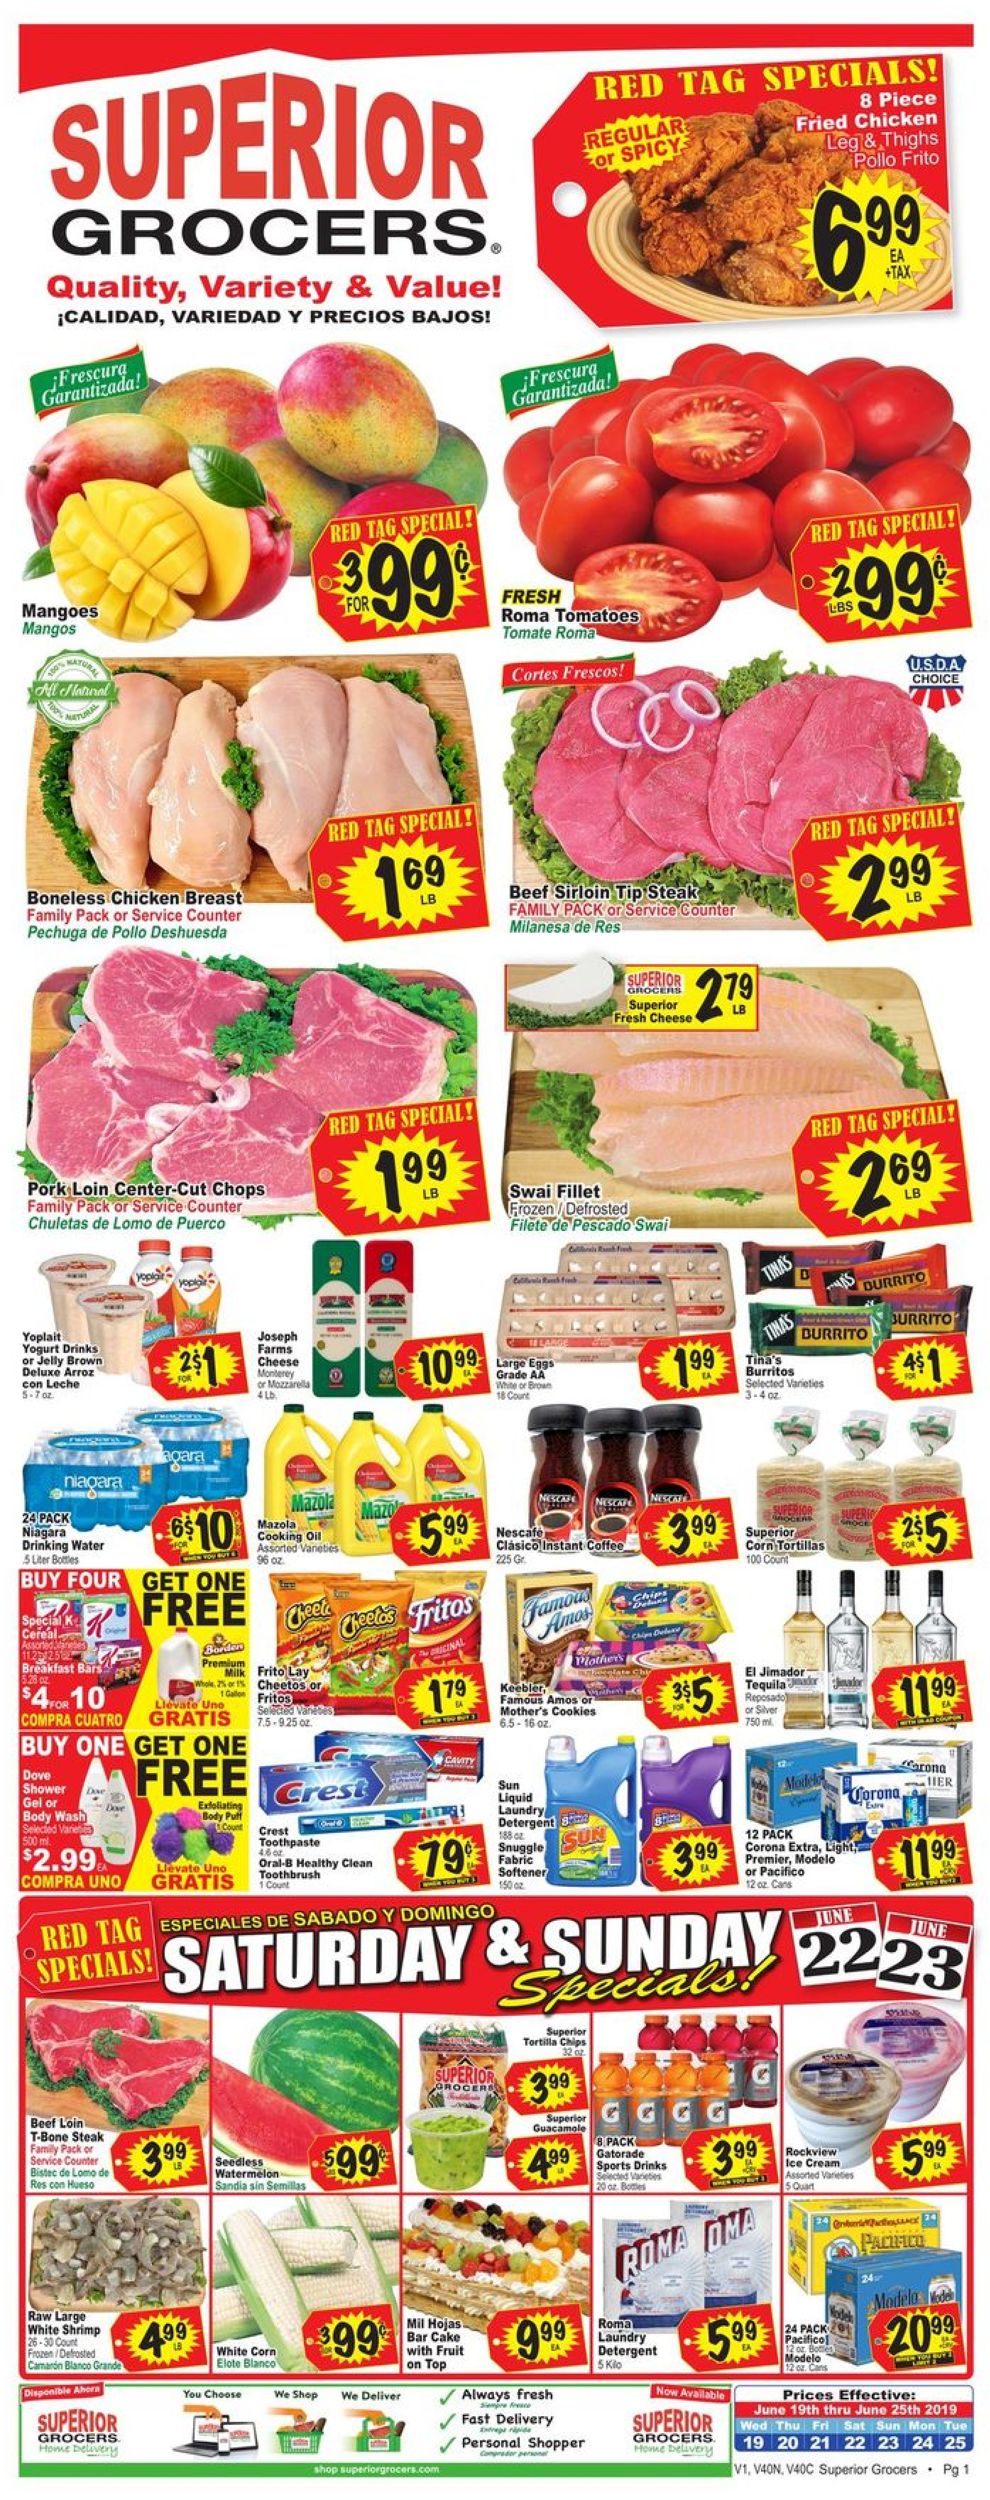 Superior Grocers Current weekly ad 06/19 - 06/25/2019 - frequent-ads.com